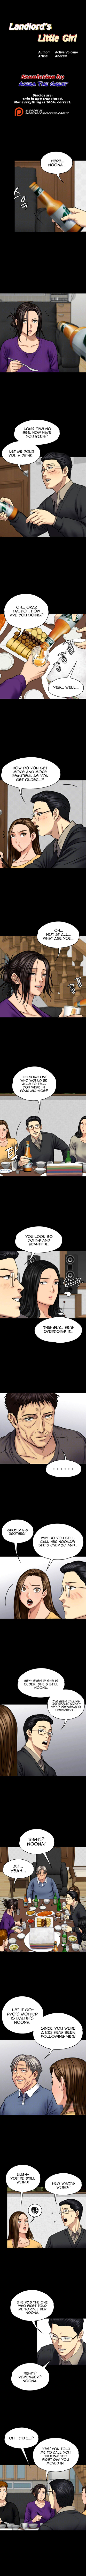 Panel Image 1 for chapter 101 of manhwa Queen Bee on read.oppai.stream